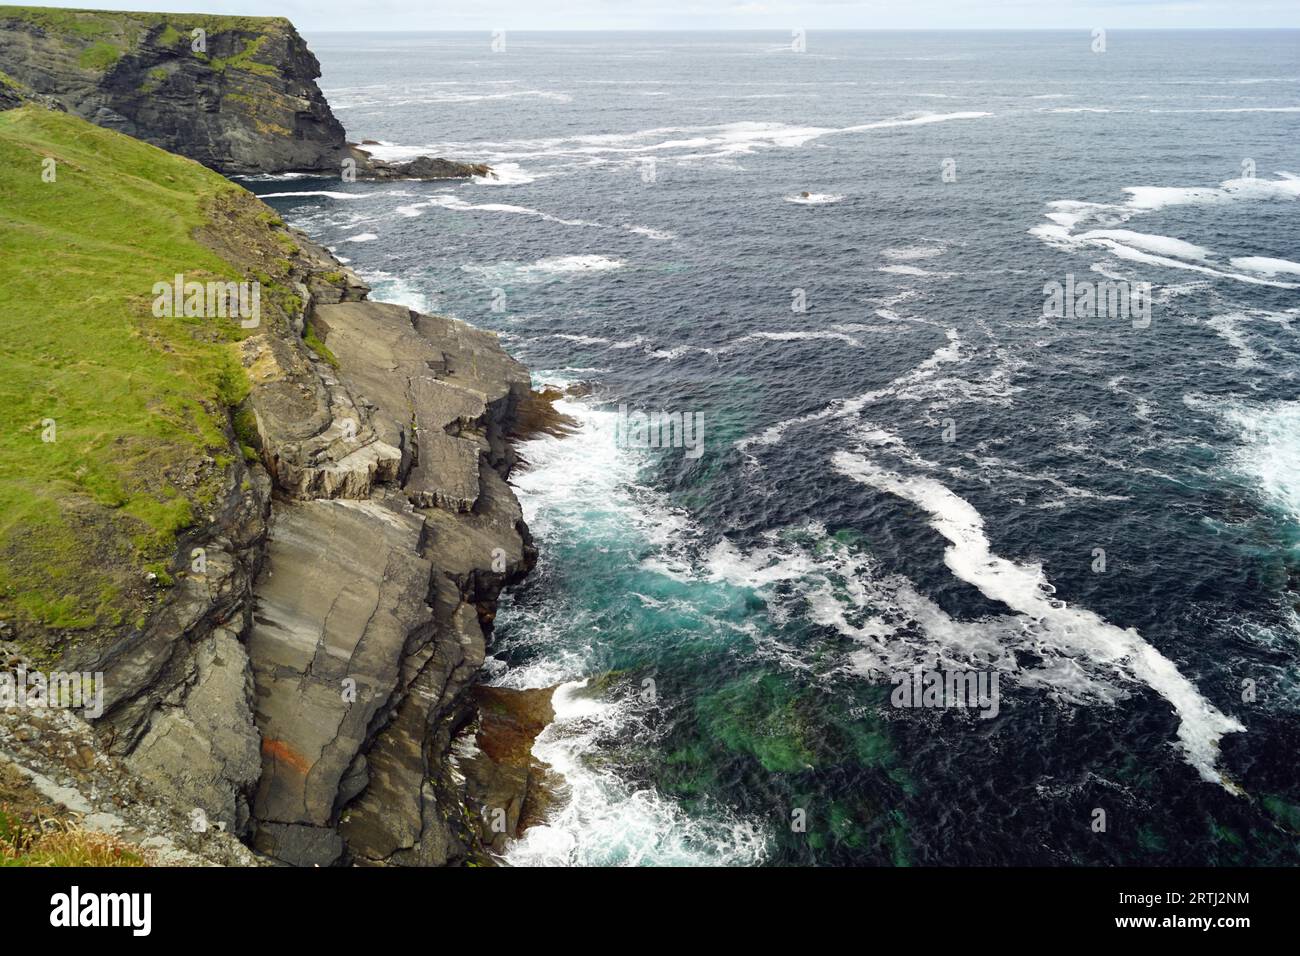 The Kilkee Cliff walk is a scenic 2 to 3 hour (8km) moderate loop walk along the Kilkee Cliffs starting at the Diamond Rocks Cafe, Pollock Holes car Stock Photo